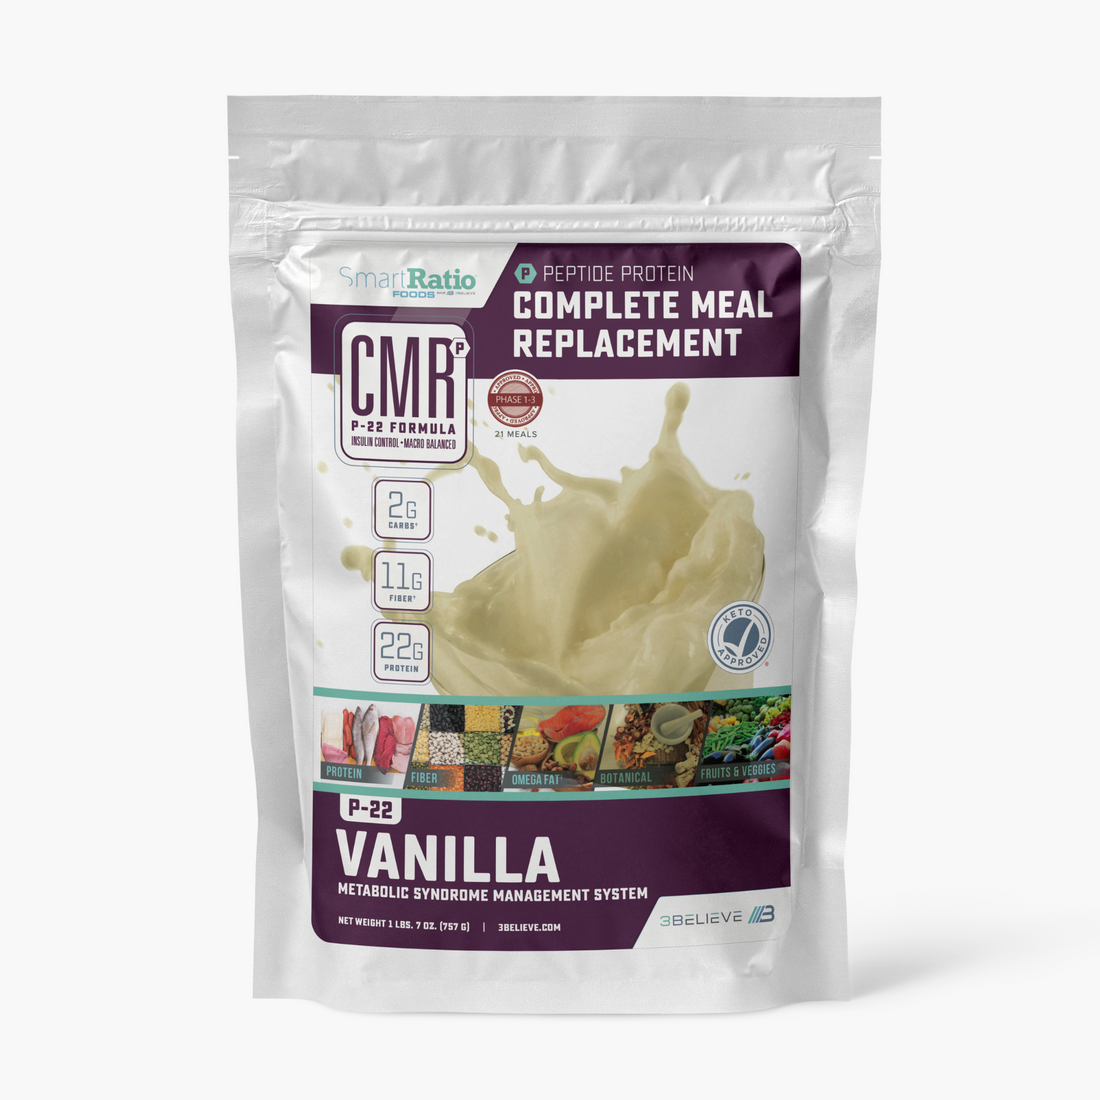 SmartShake Complete Meal Replacement - 21 Meals (P-22)